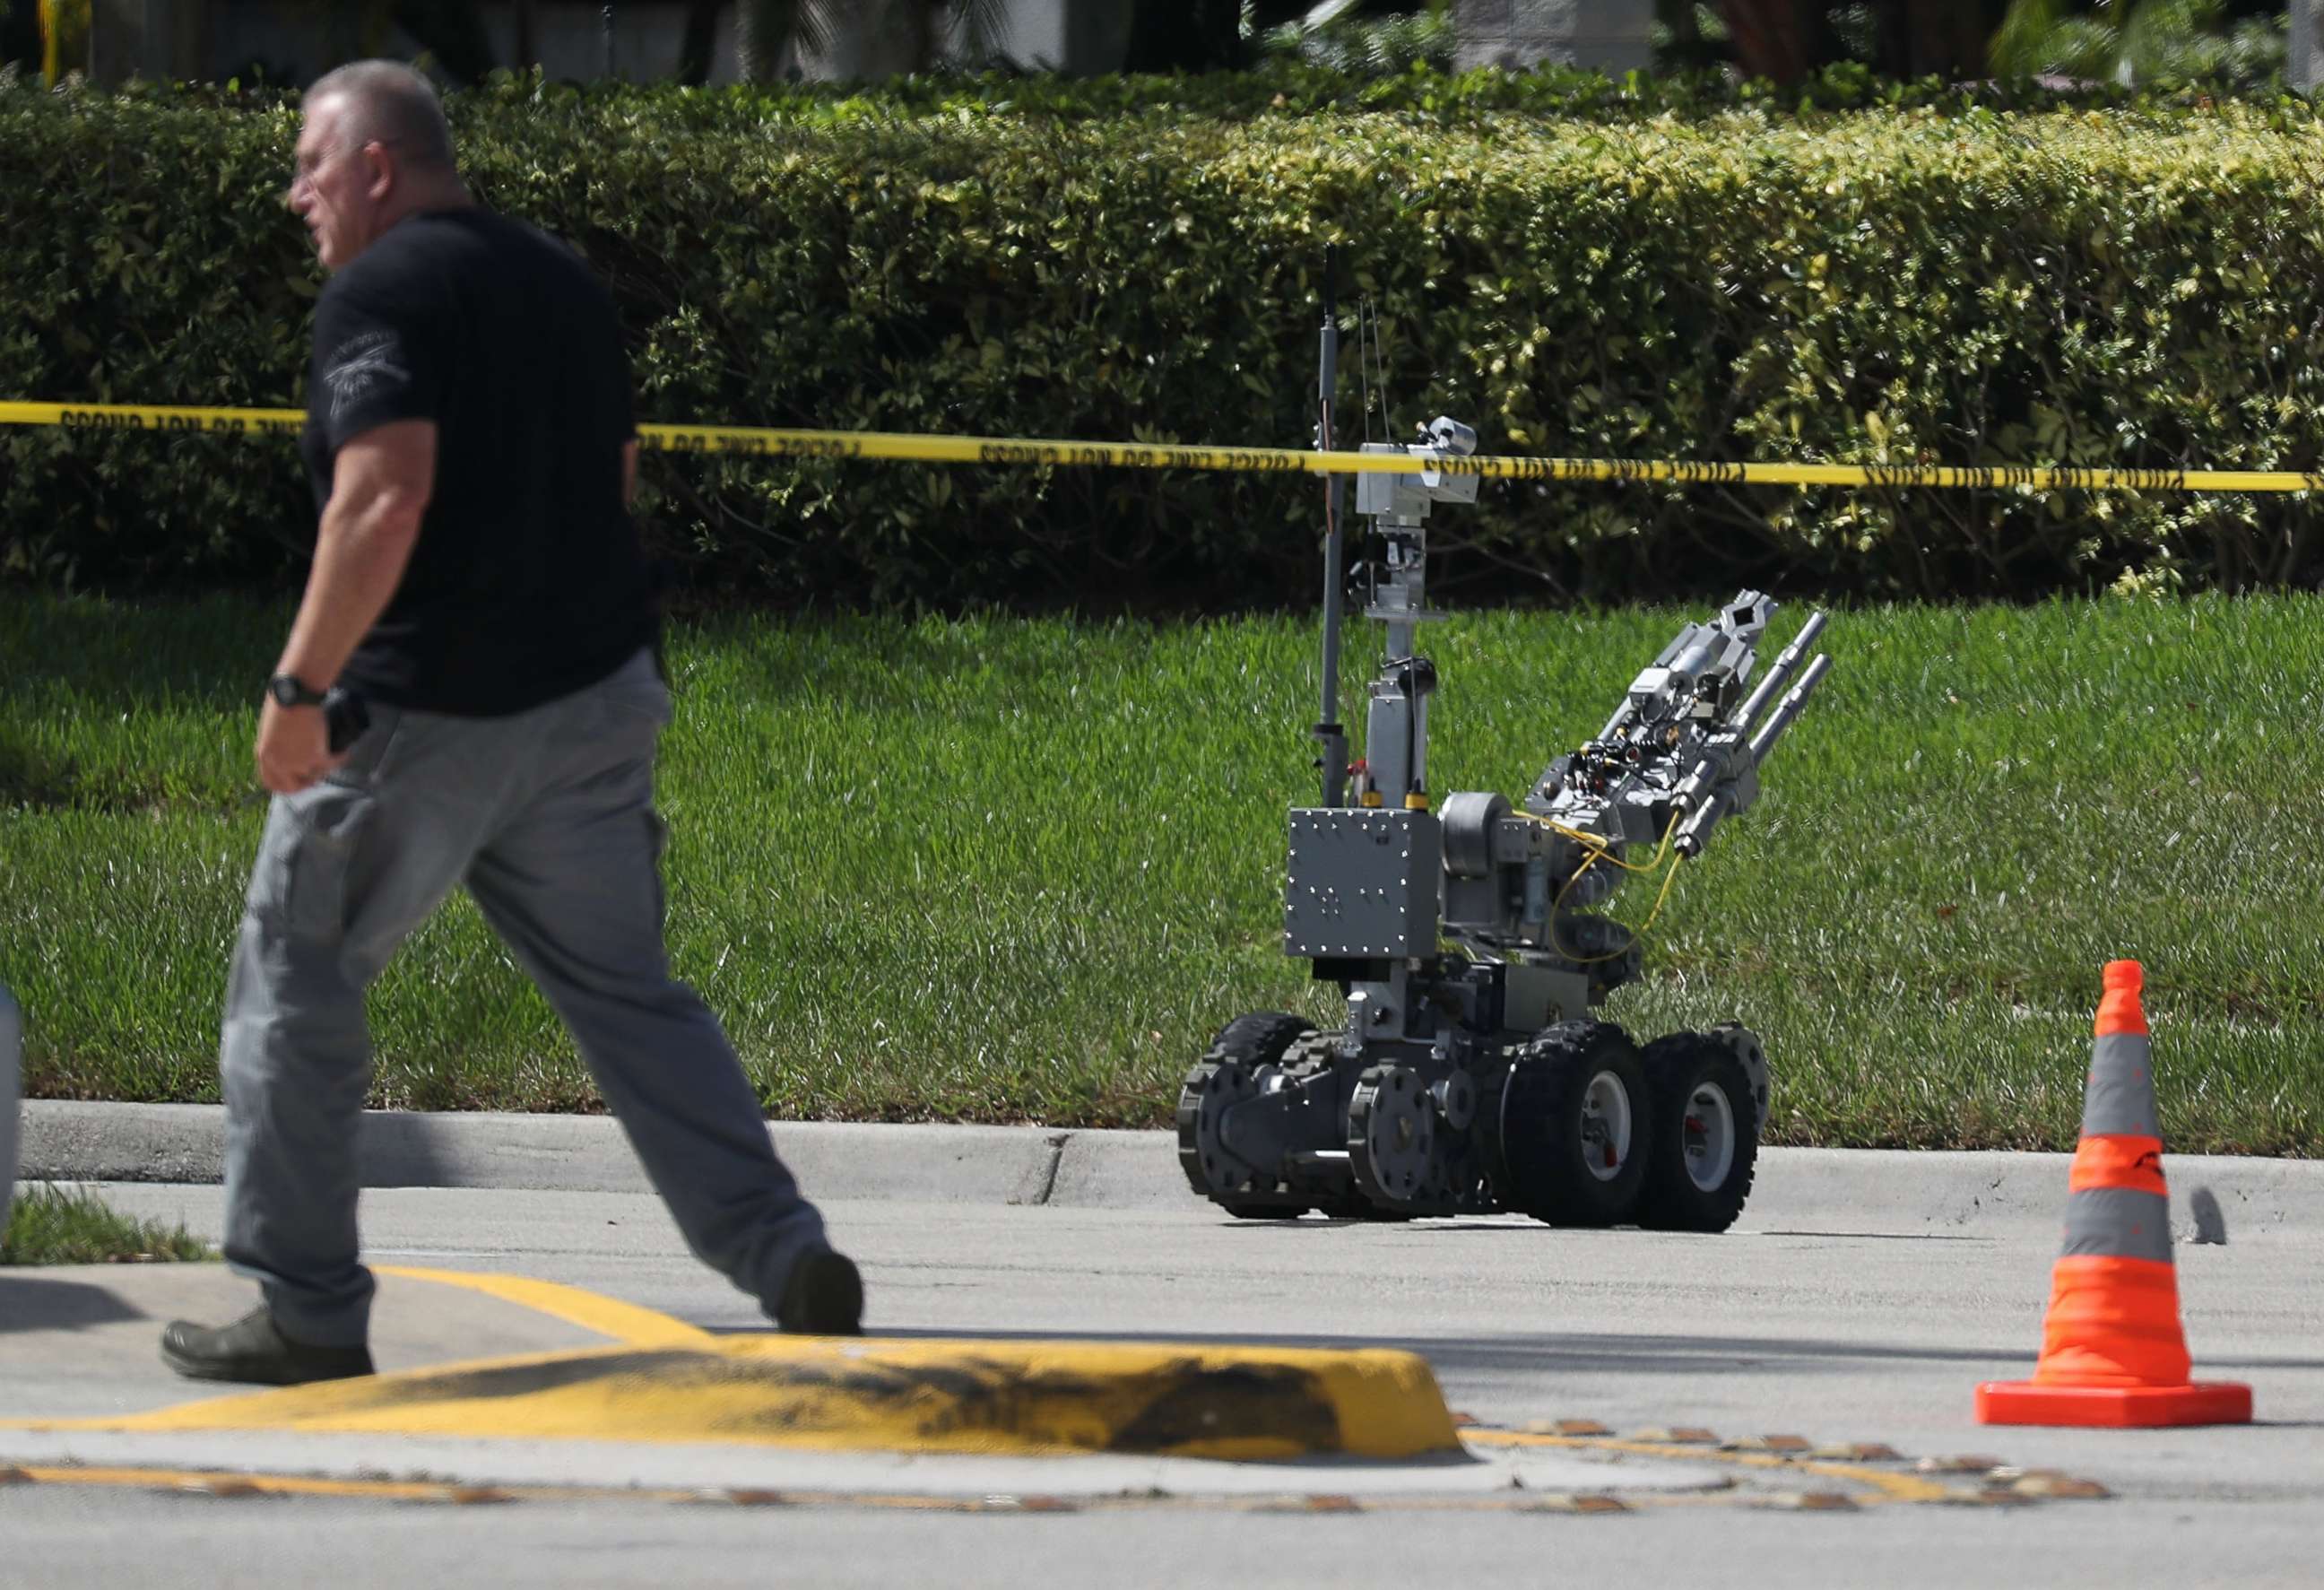 PHOTO: The Broward Sheriff's Office bomb squad deploys a robotic vehicle to investigate a suspicious package in the building where Rep. Debbie Wasserman Schultz has an office, Oct. 24, 2018, in Sunrise, Fla.